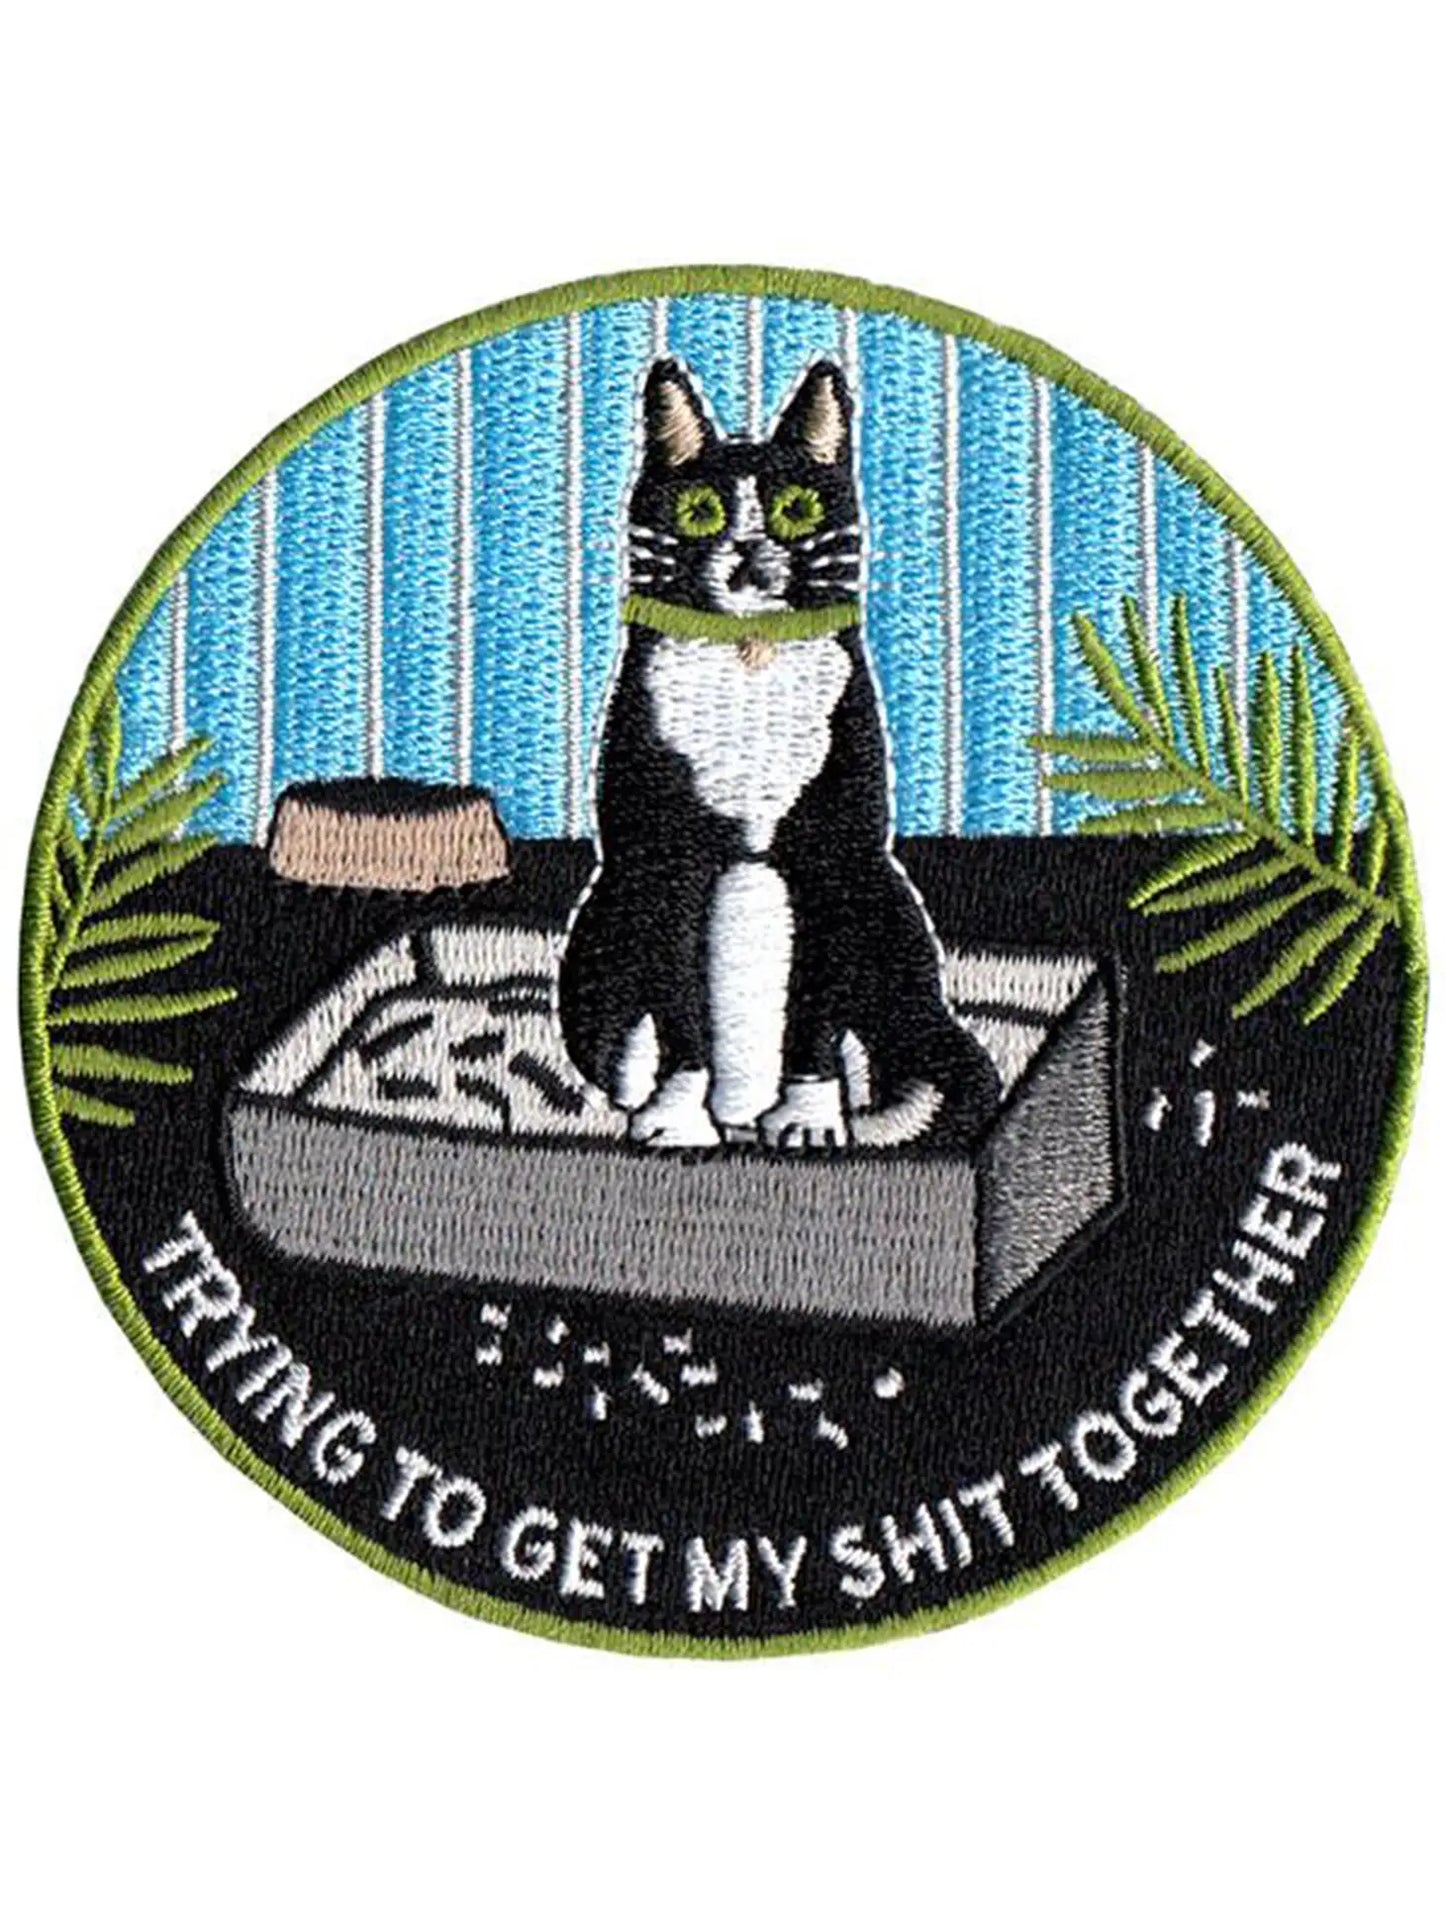 Trying To Get My Shit Together Patch